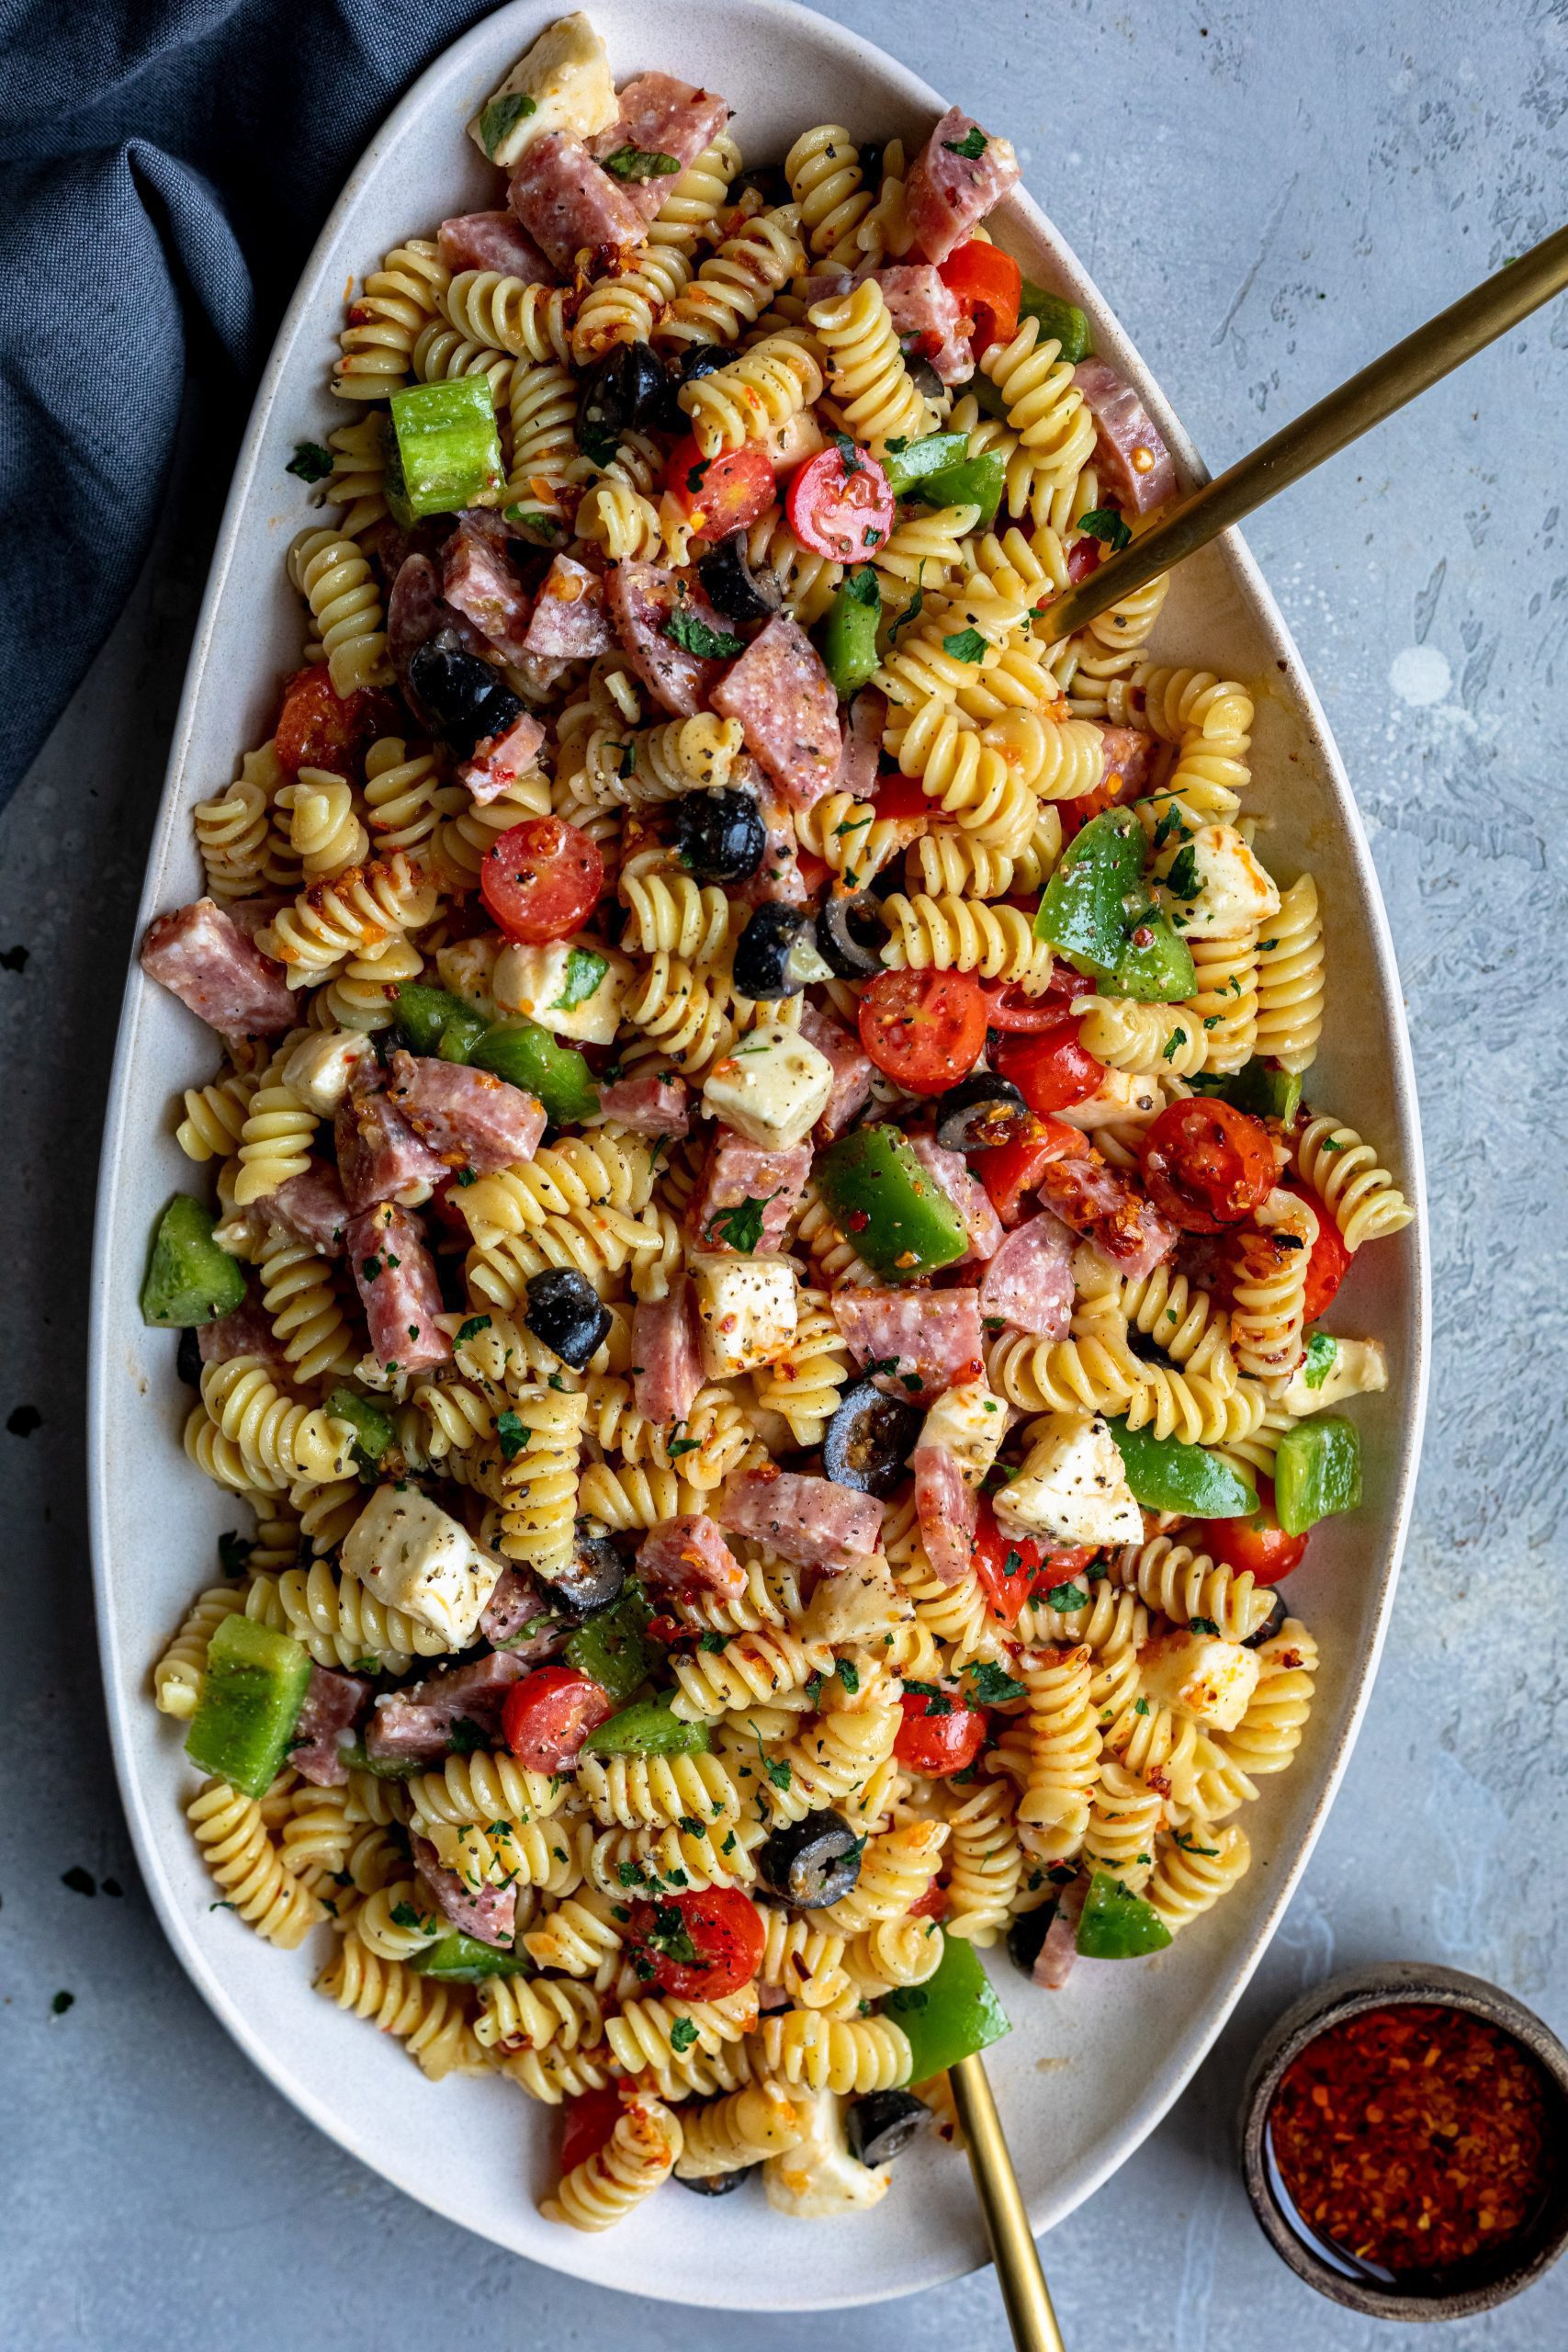 A heaping dish of italian pasta salad, loaded with various cooked meats and fresh vegetables.